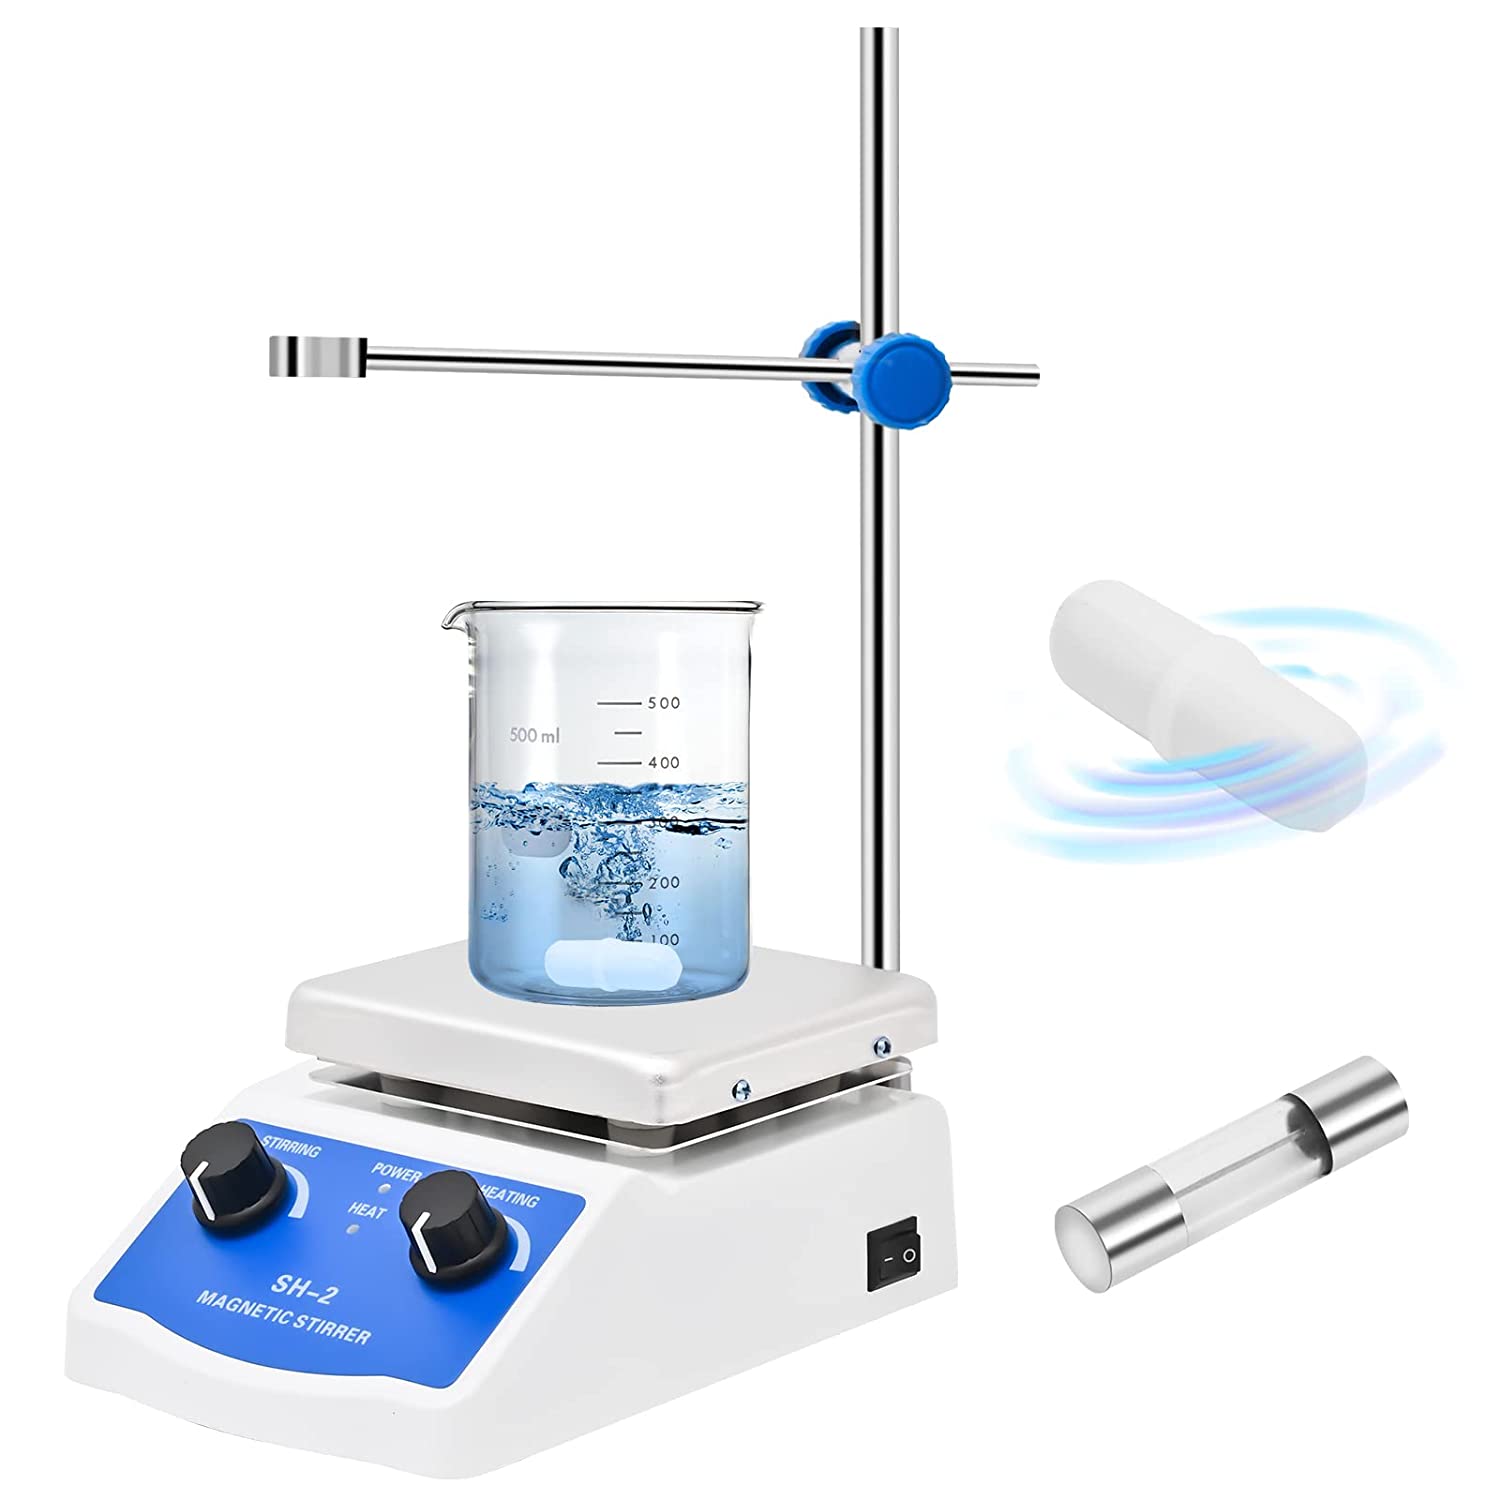 SH 2Lab Magnetic Stirrer Plate For Chemistry 1000ml Capacity 100 2000 RPM Speed Resin Epoxy Stirring